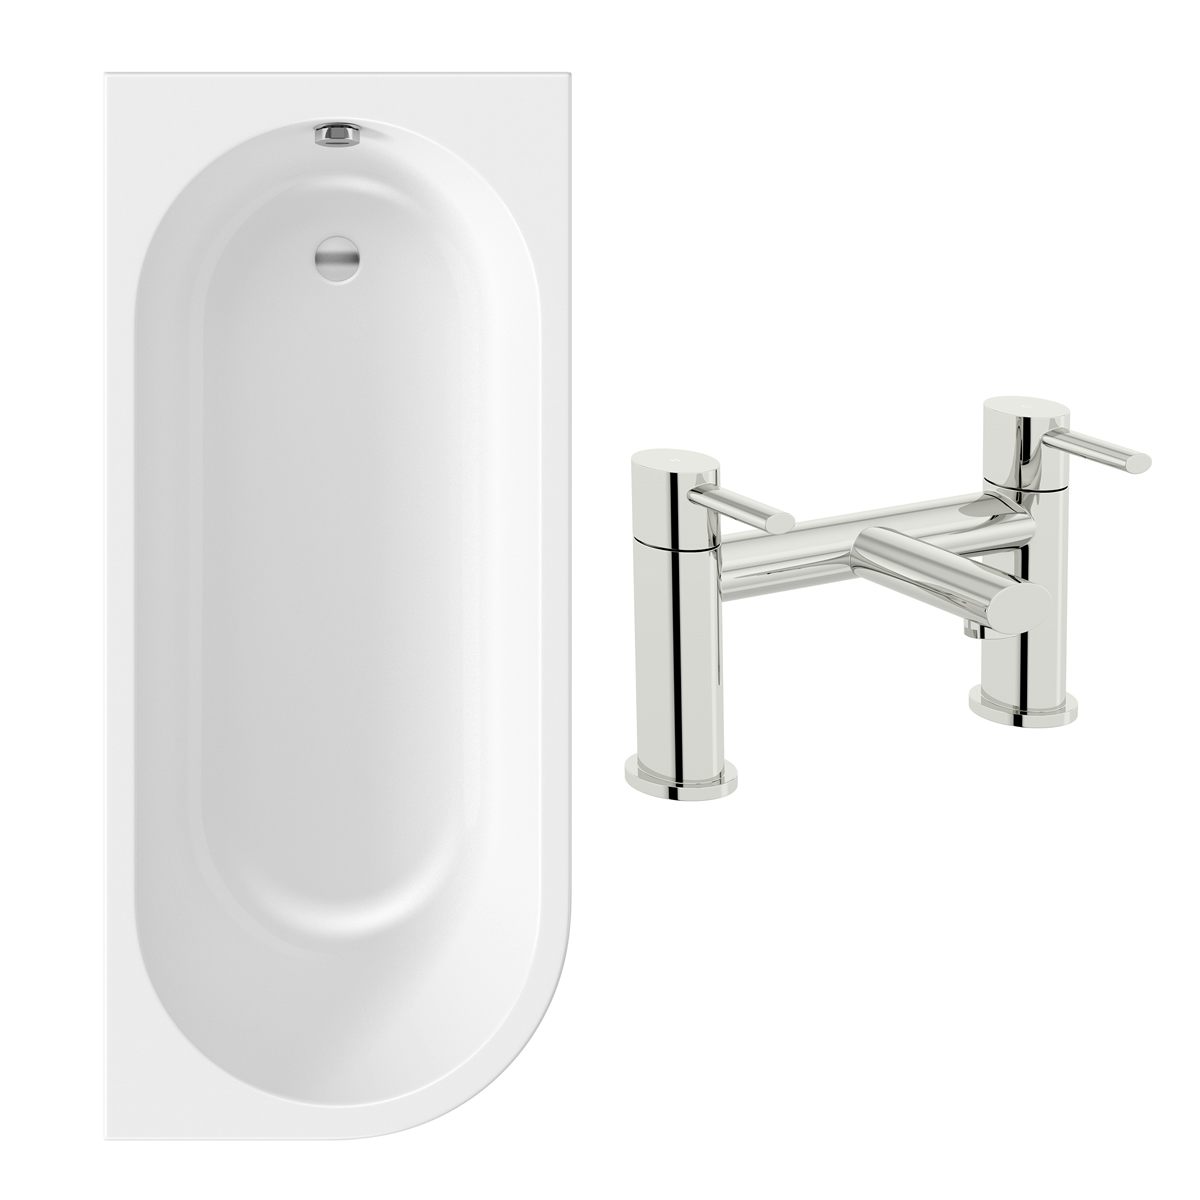 Orchard Elsdon right handed J shaped single ended bath 1700 x 750 with free tap